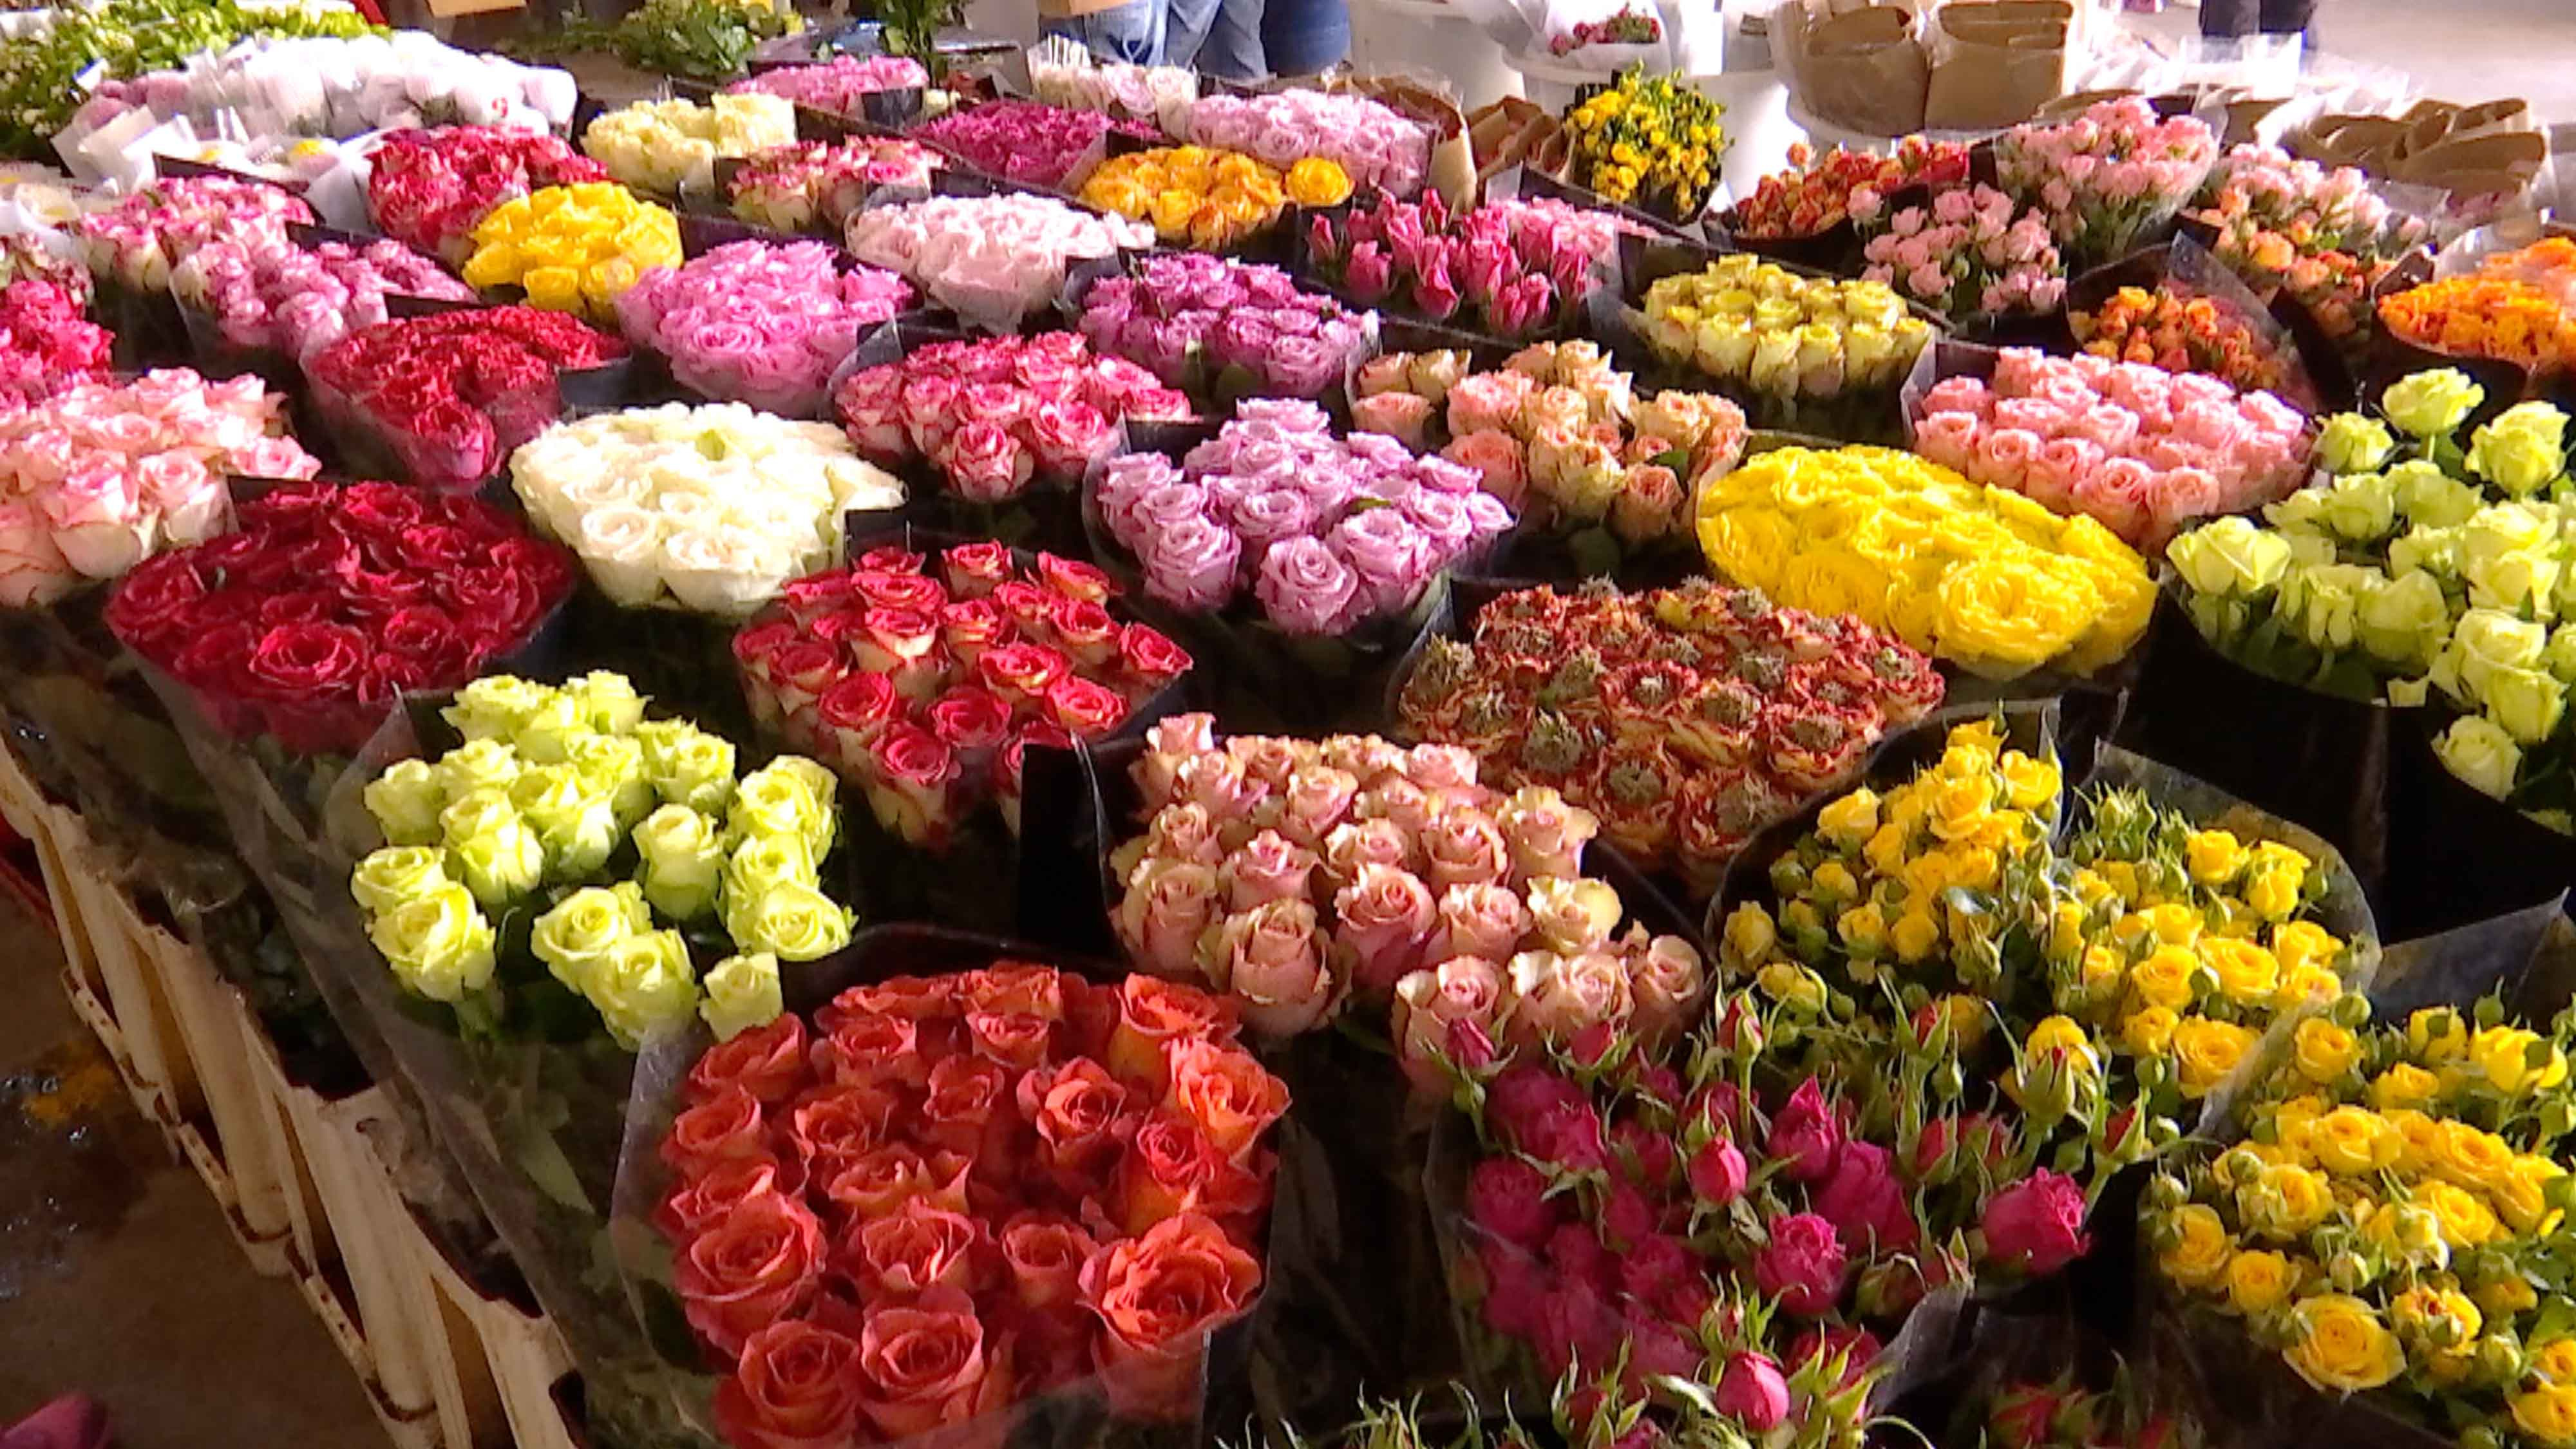 China's Kunming remains one of world's top flower markets | Pakistan